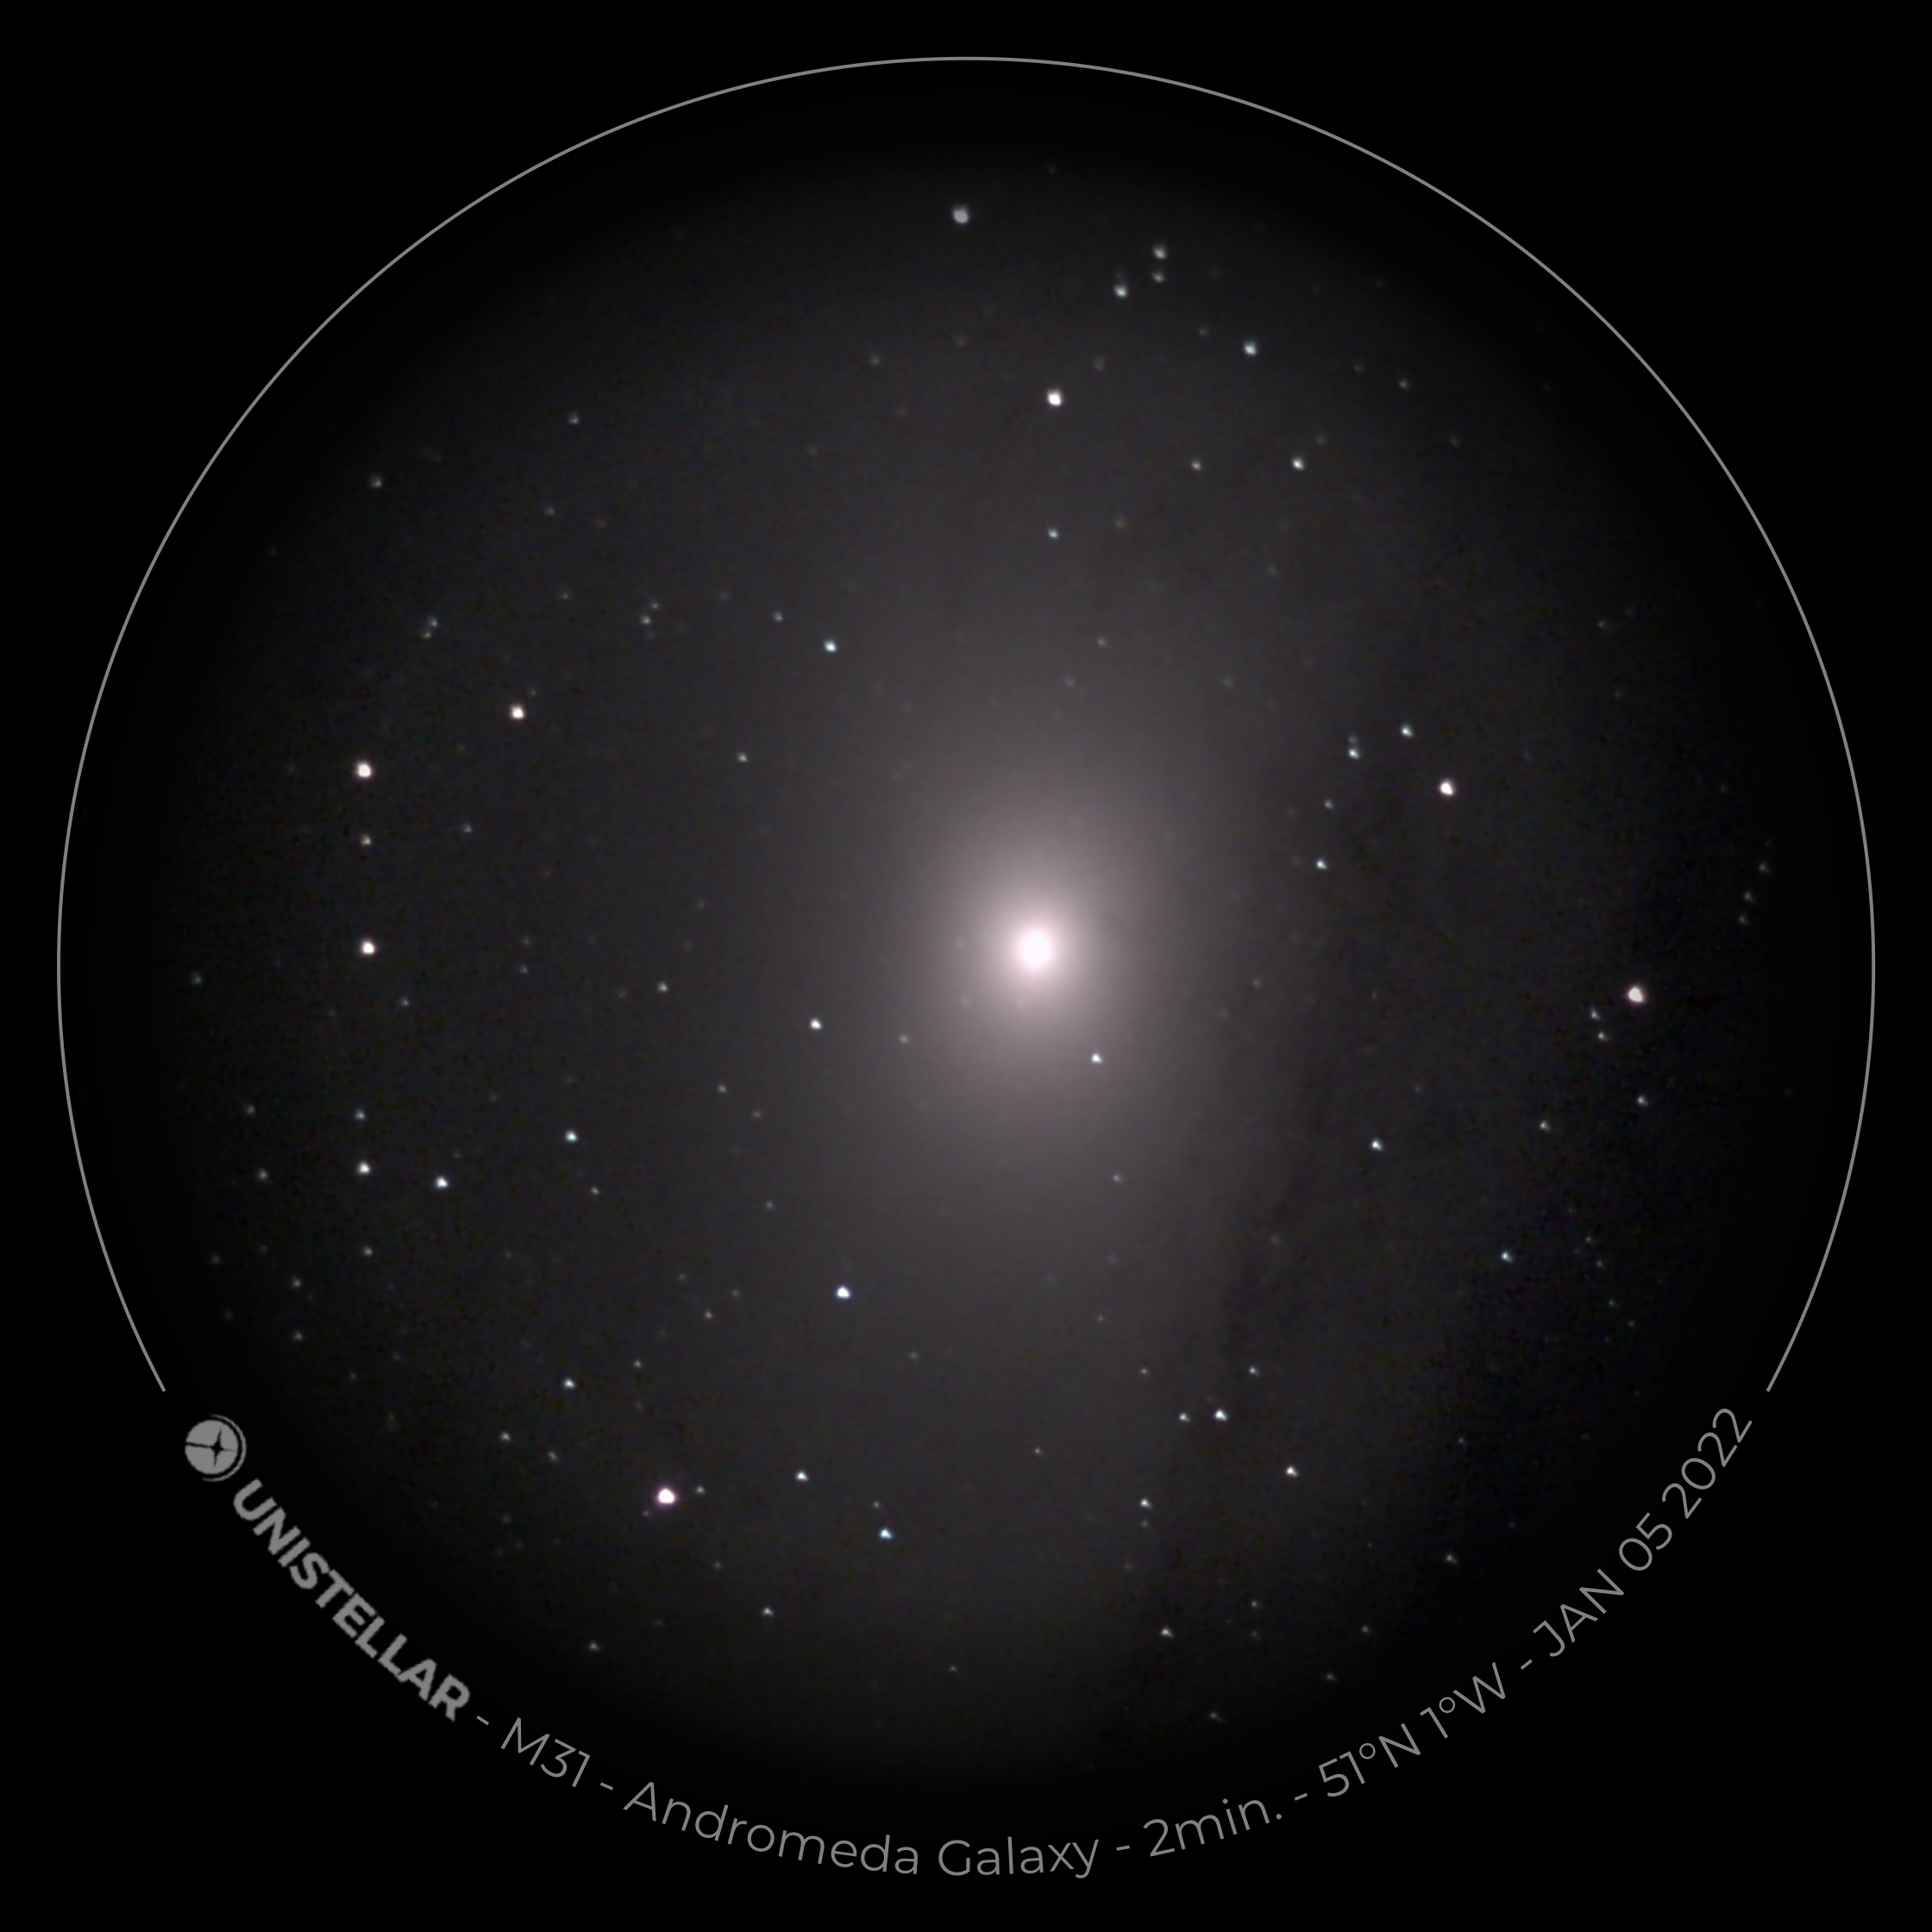 eVscope-20220105-201517-M31.png